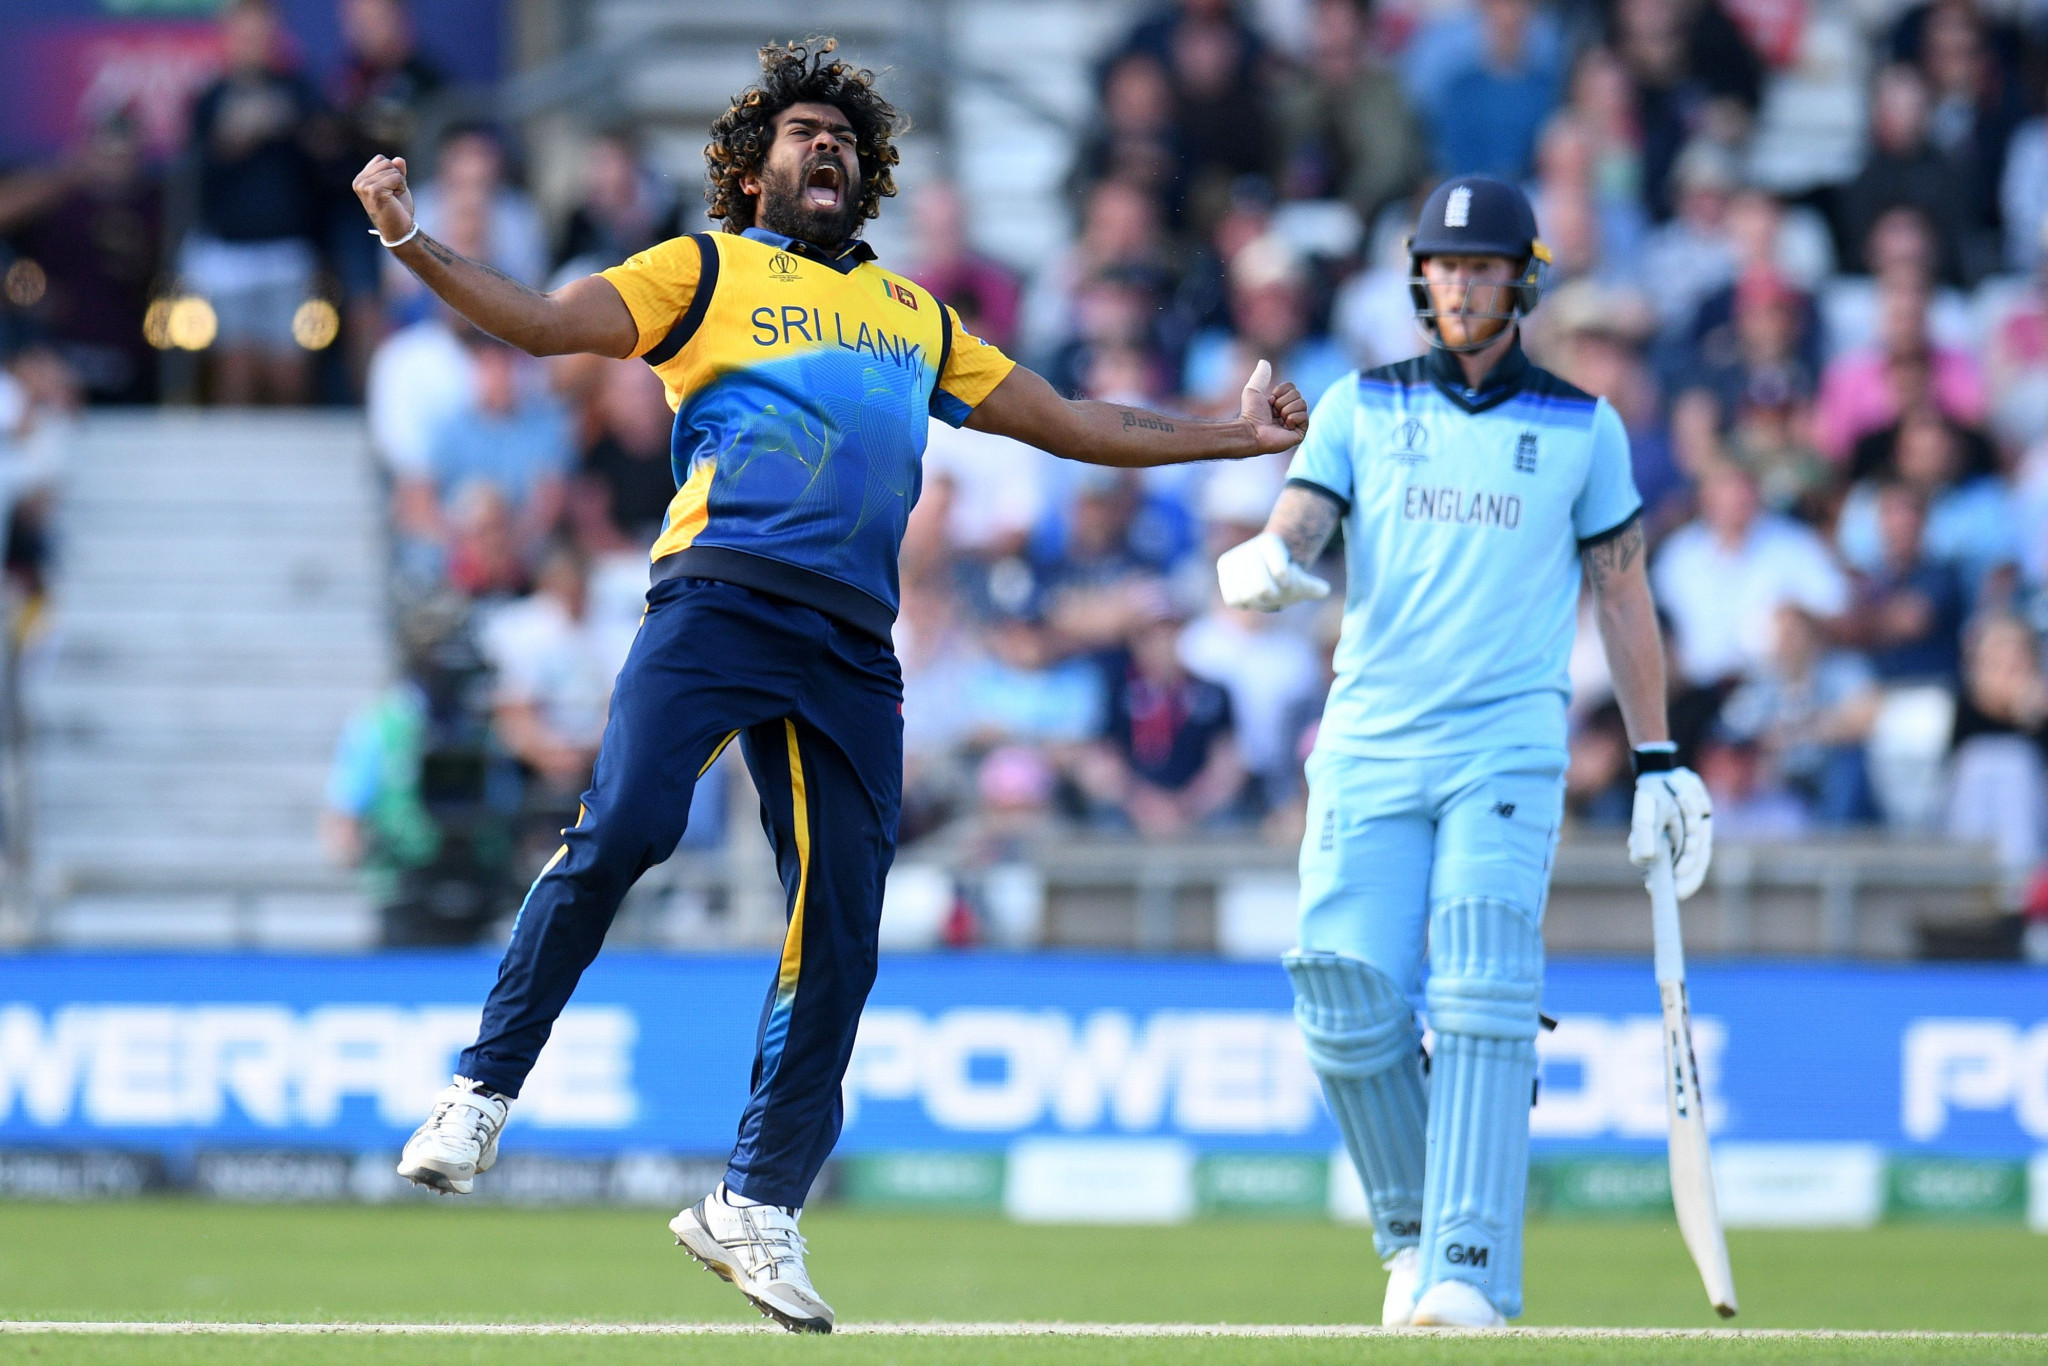 Sri Lanka stun England to blow race for semi-final places wide open at Cricket World Cup 